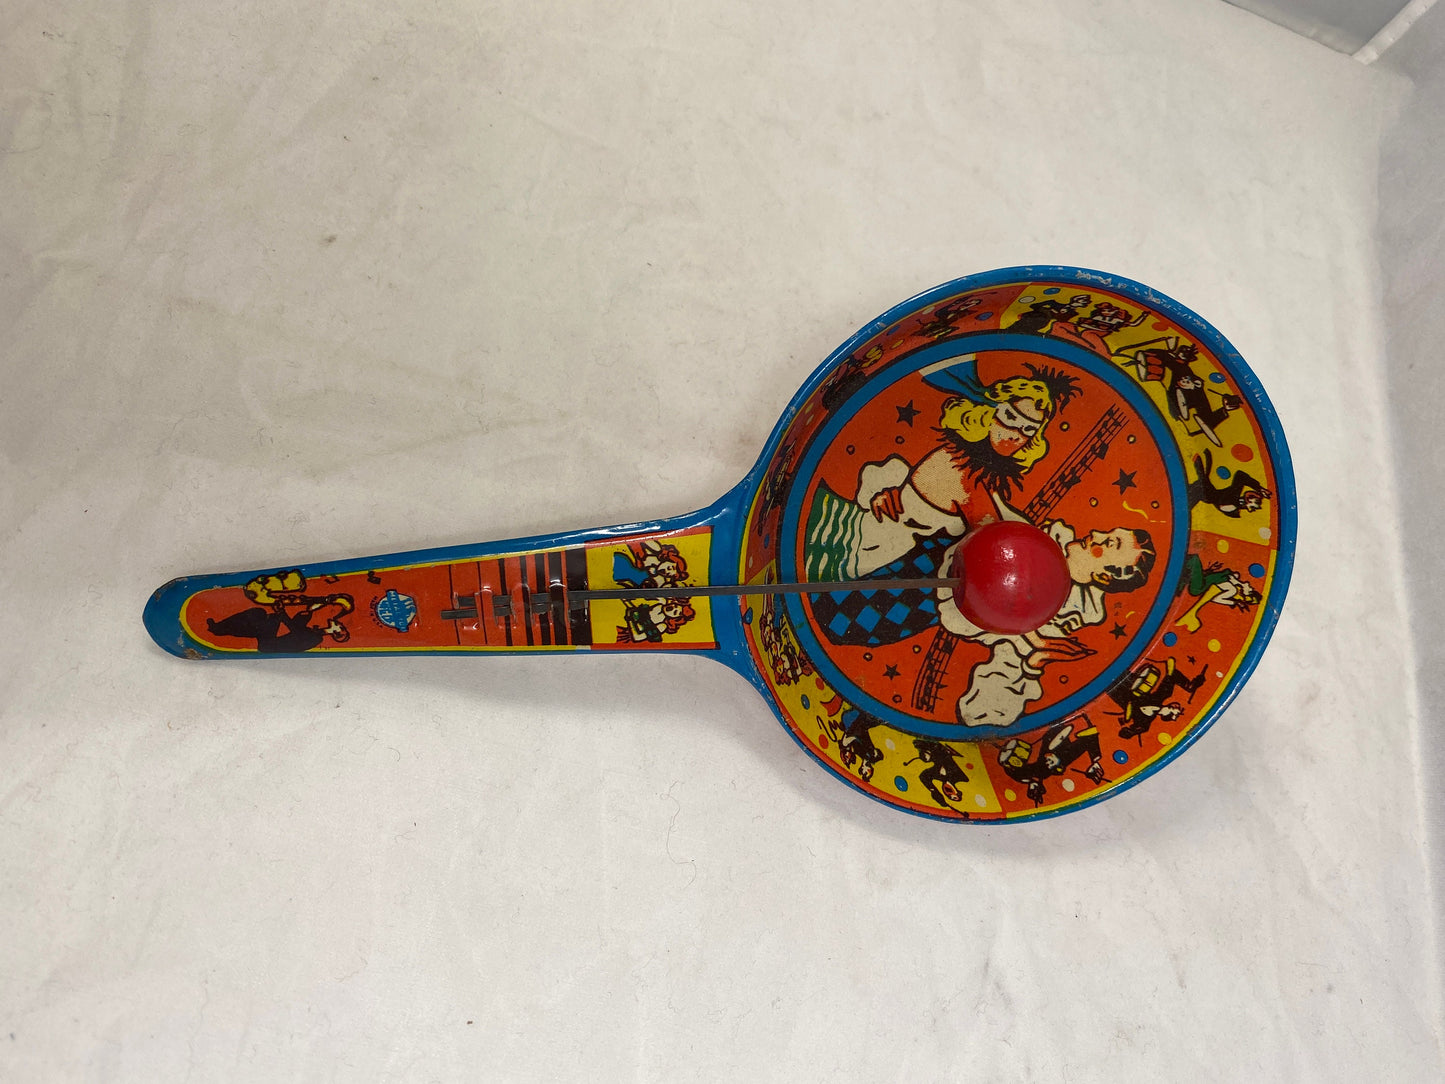 Vintage Tin Litho Noisemaker New Year's Eve Party